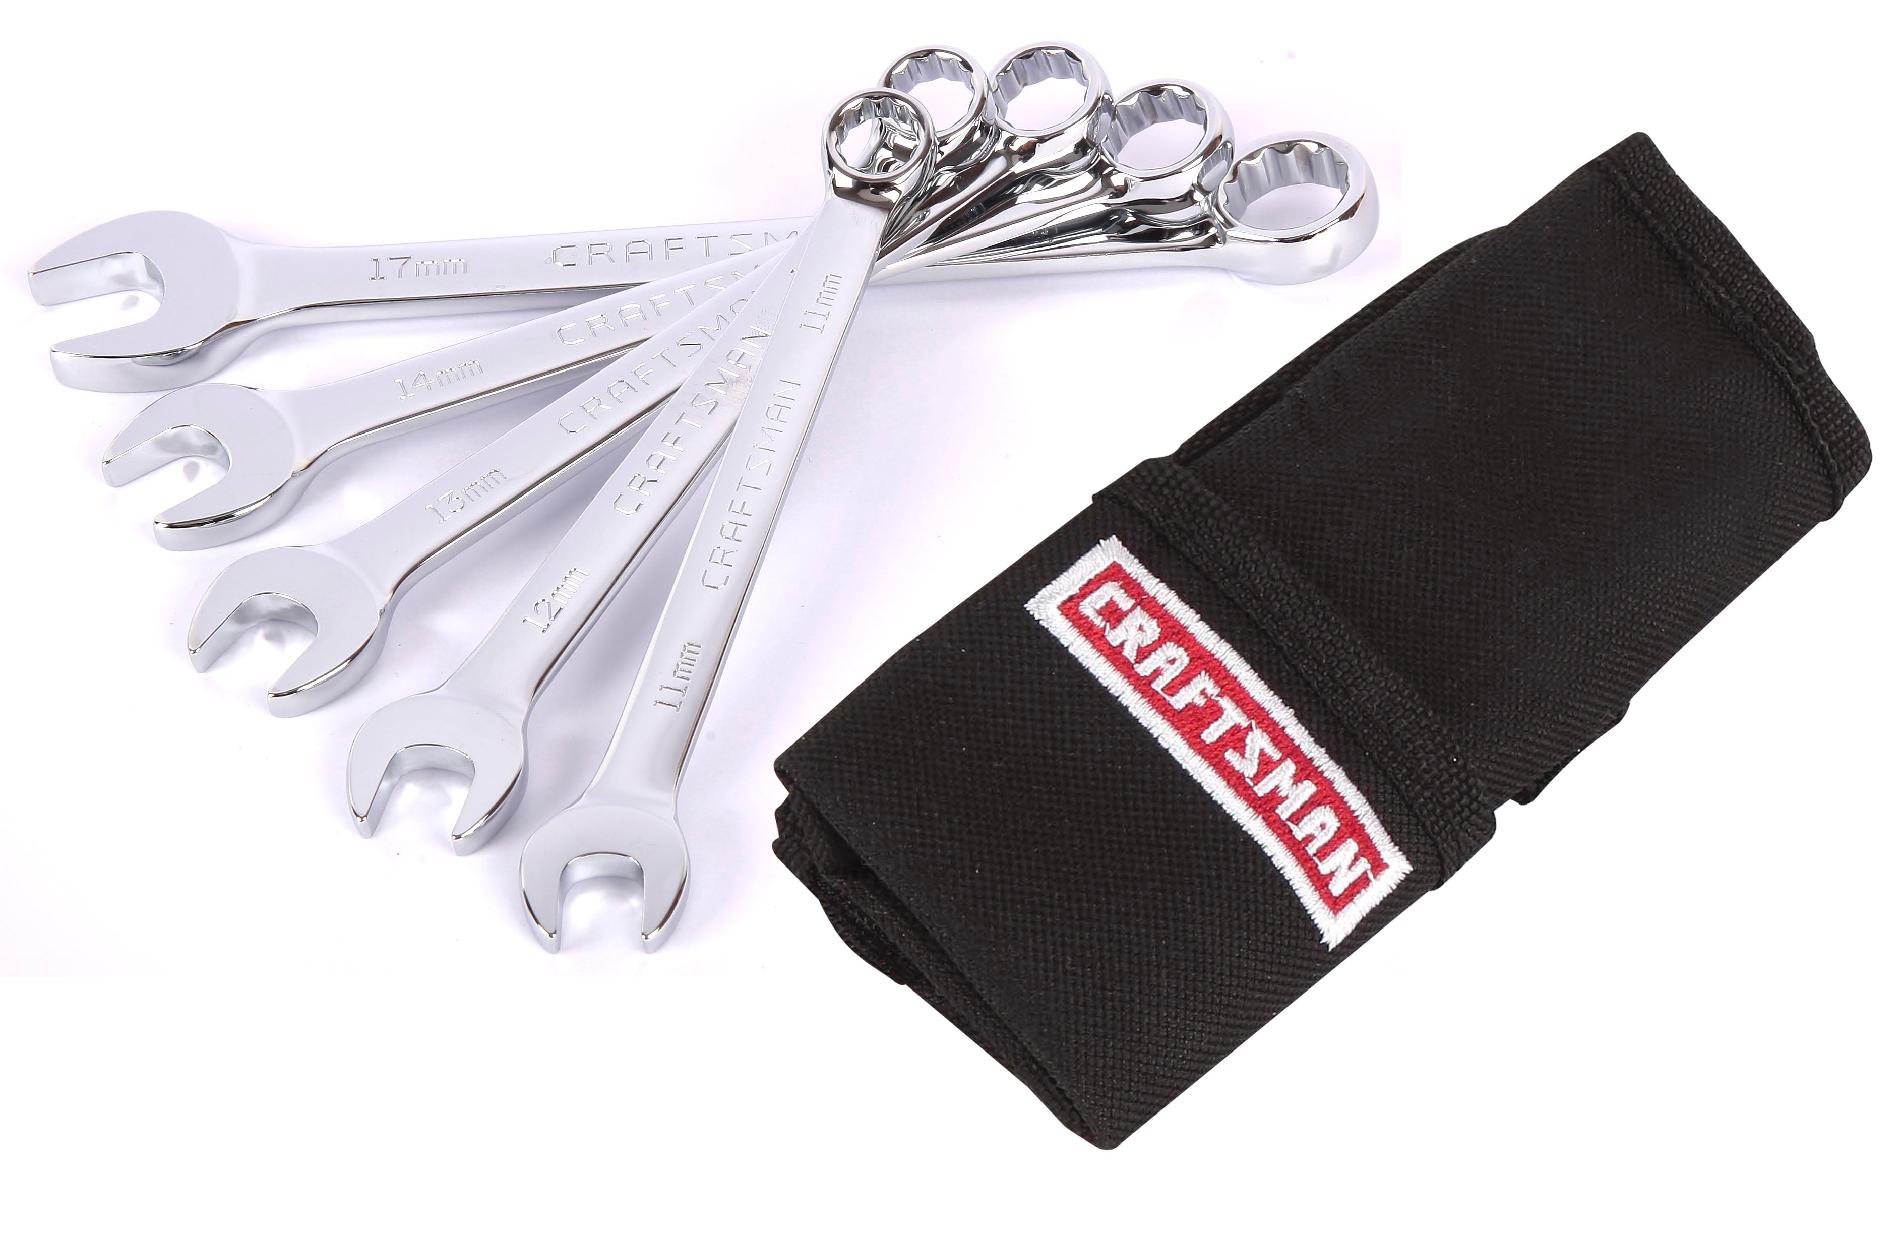 5-pc Craftsman Metric Wrench Set Only $5! (Standard or Metric)